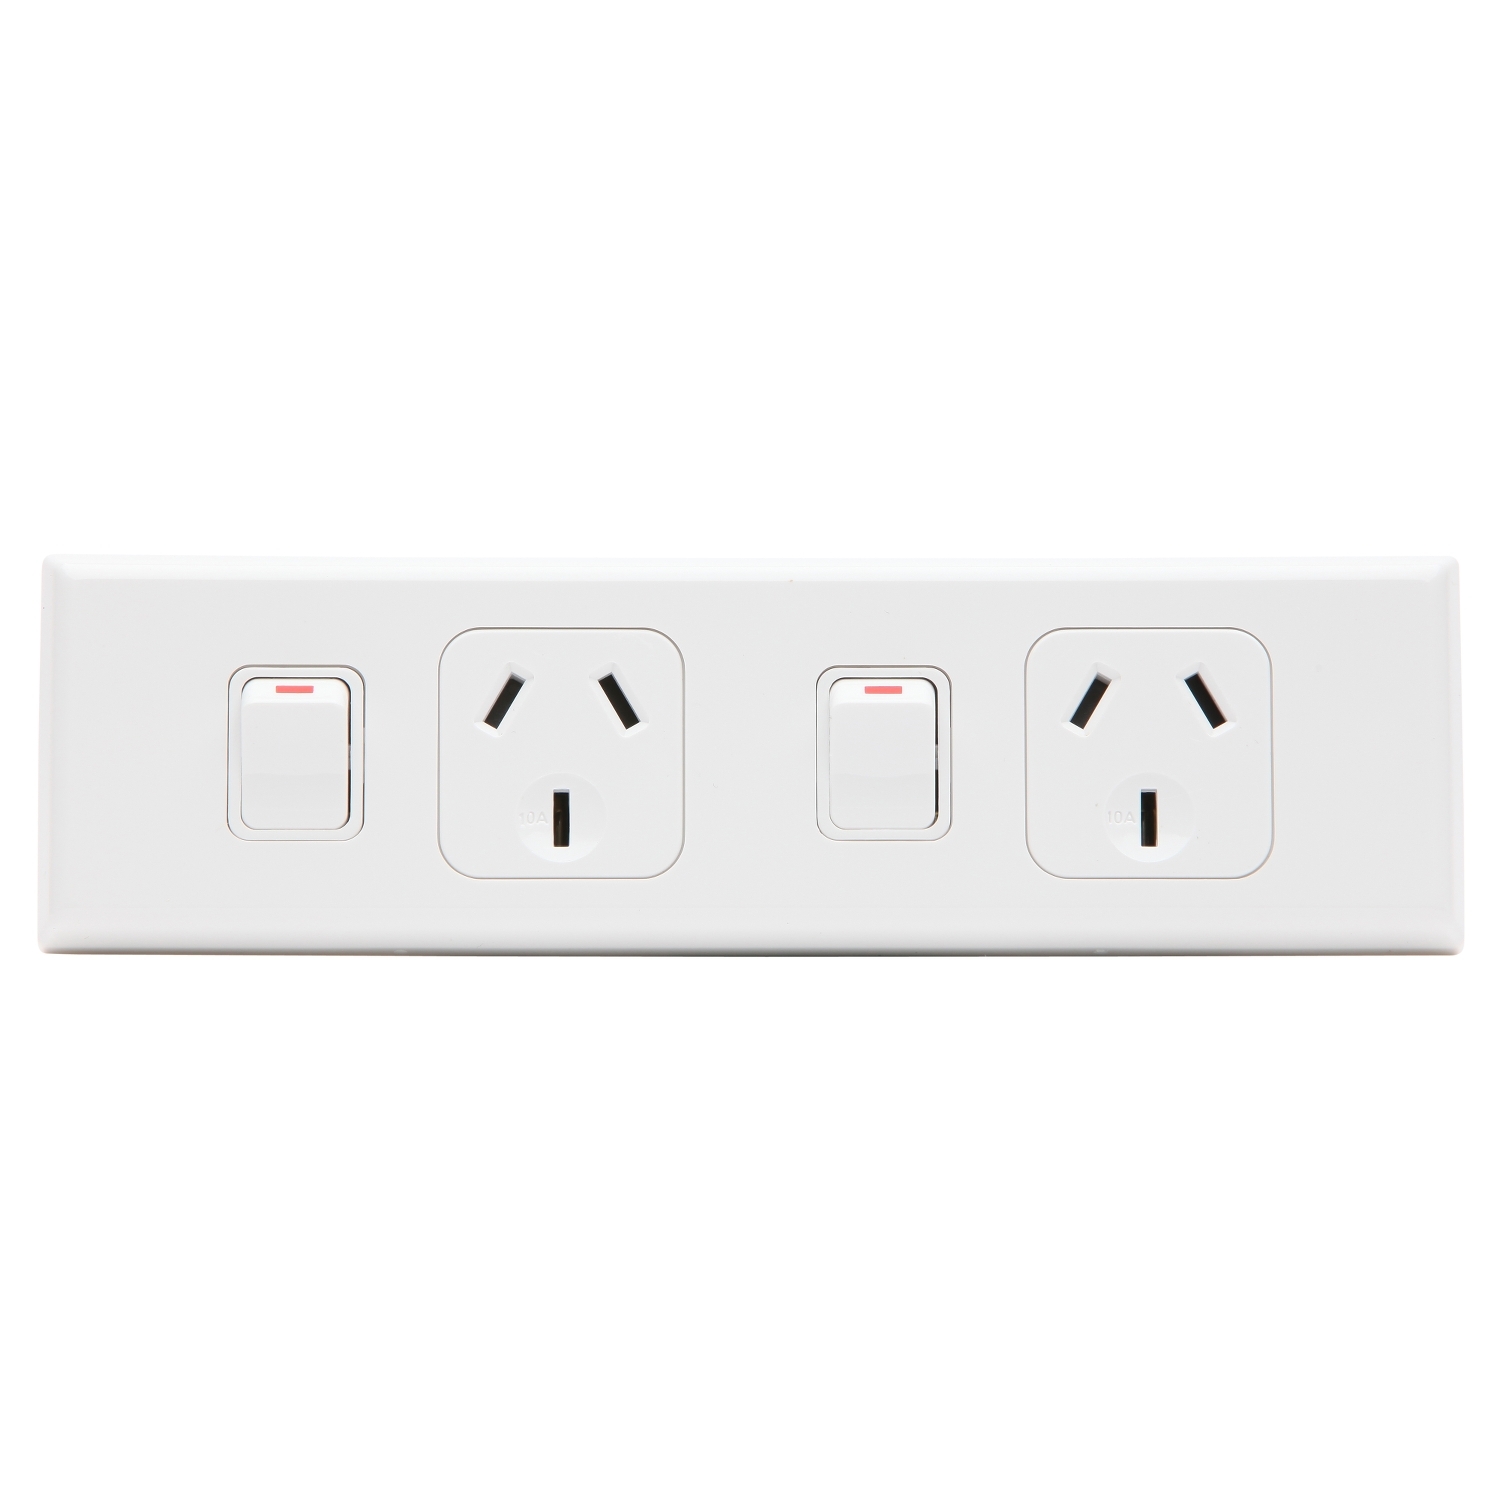 PDL Socket Outlet 600 Series - Twin switched - Assembled - Horizontal - Worktop - 250 V - 10 A - Choose Colour